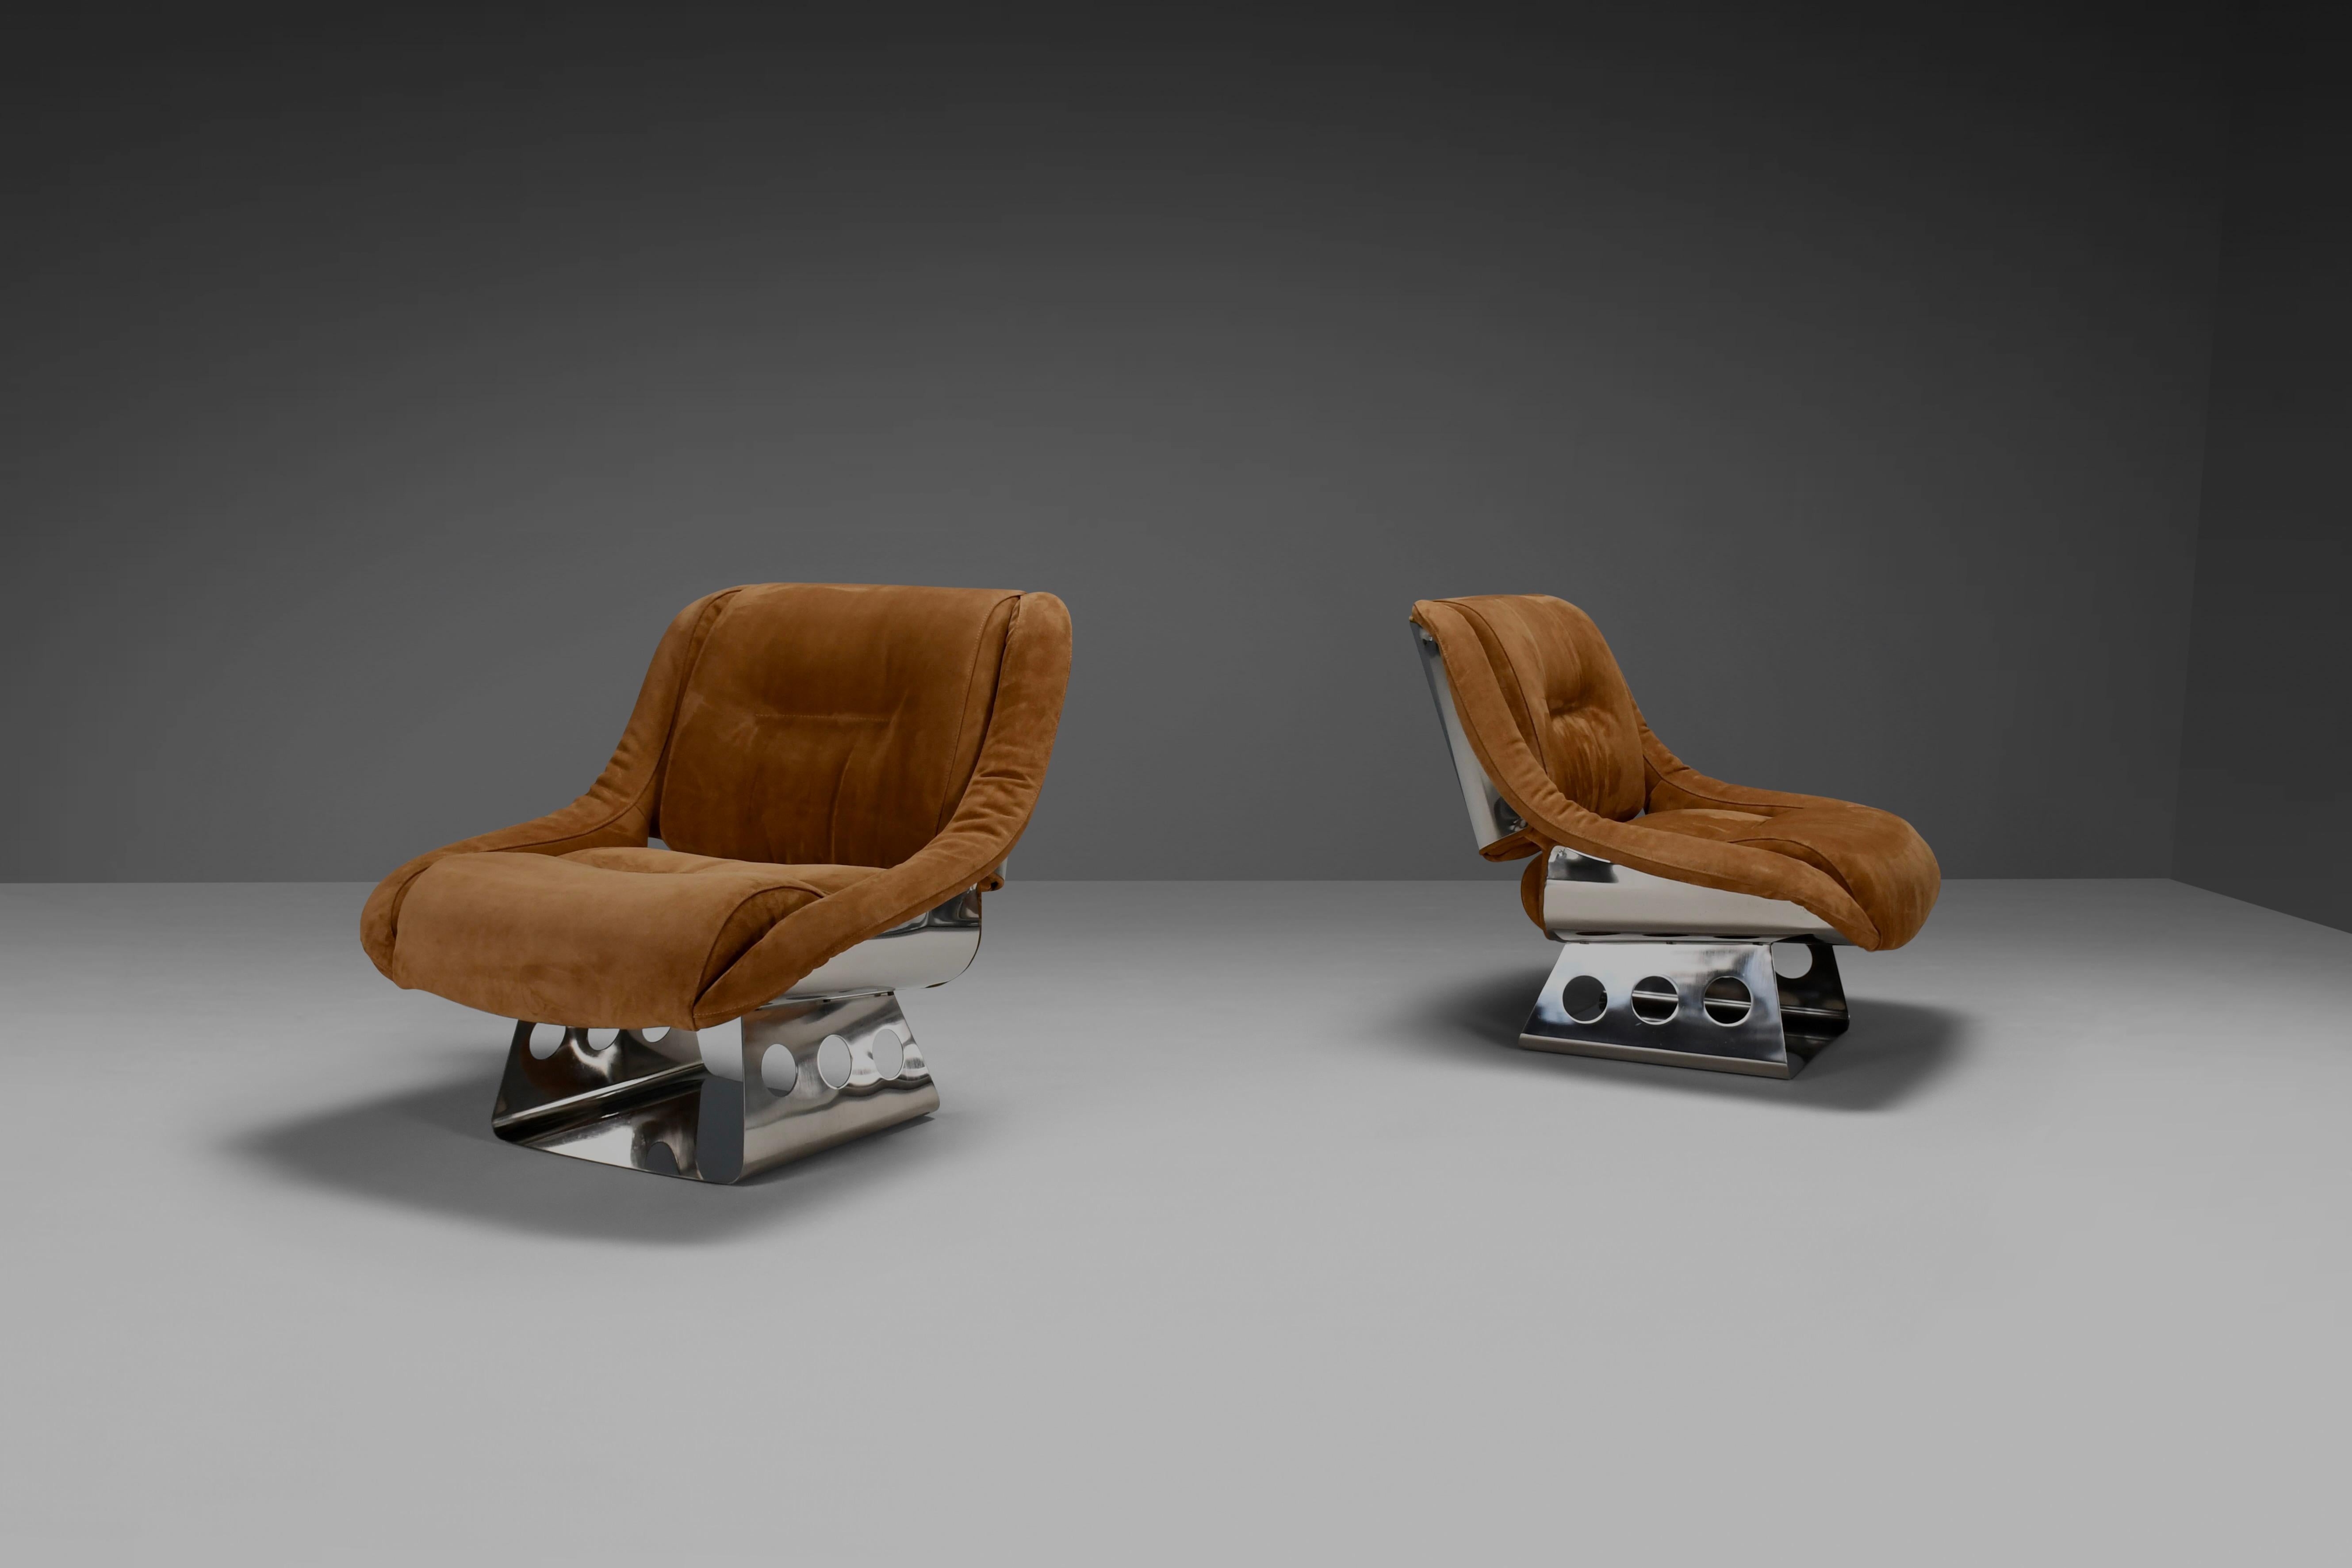 Metal Rare Suede and Stainless Steel Lounge Chairs by Rima Padova, 1974 For Sale